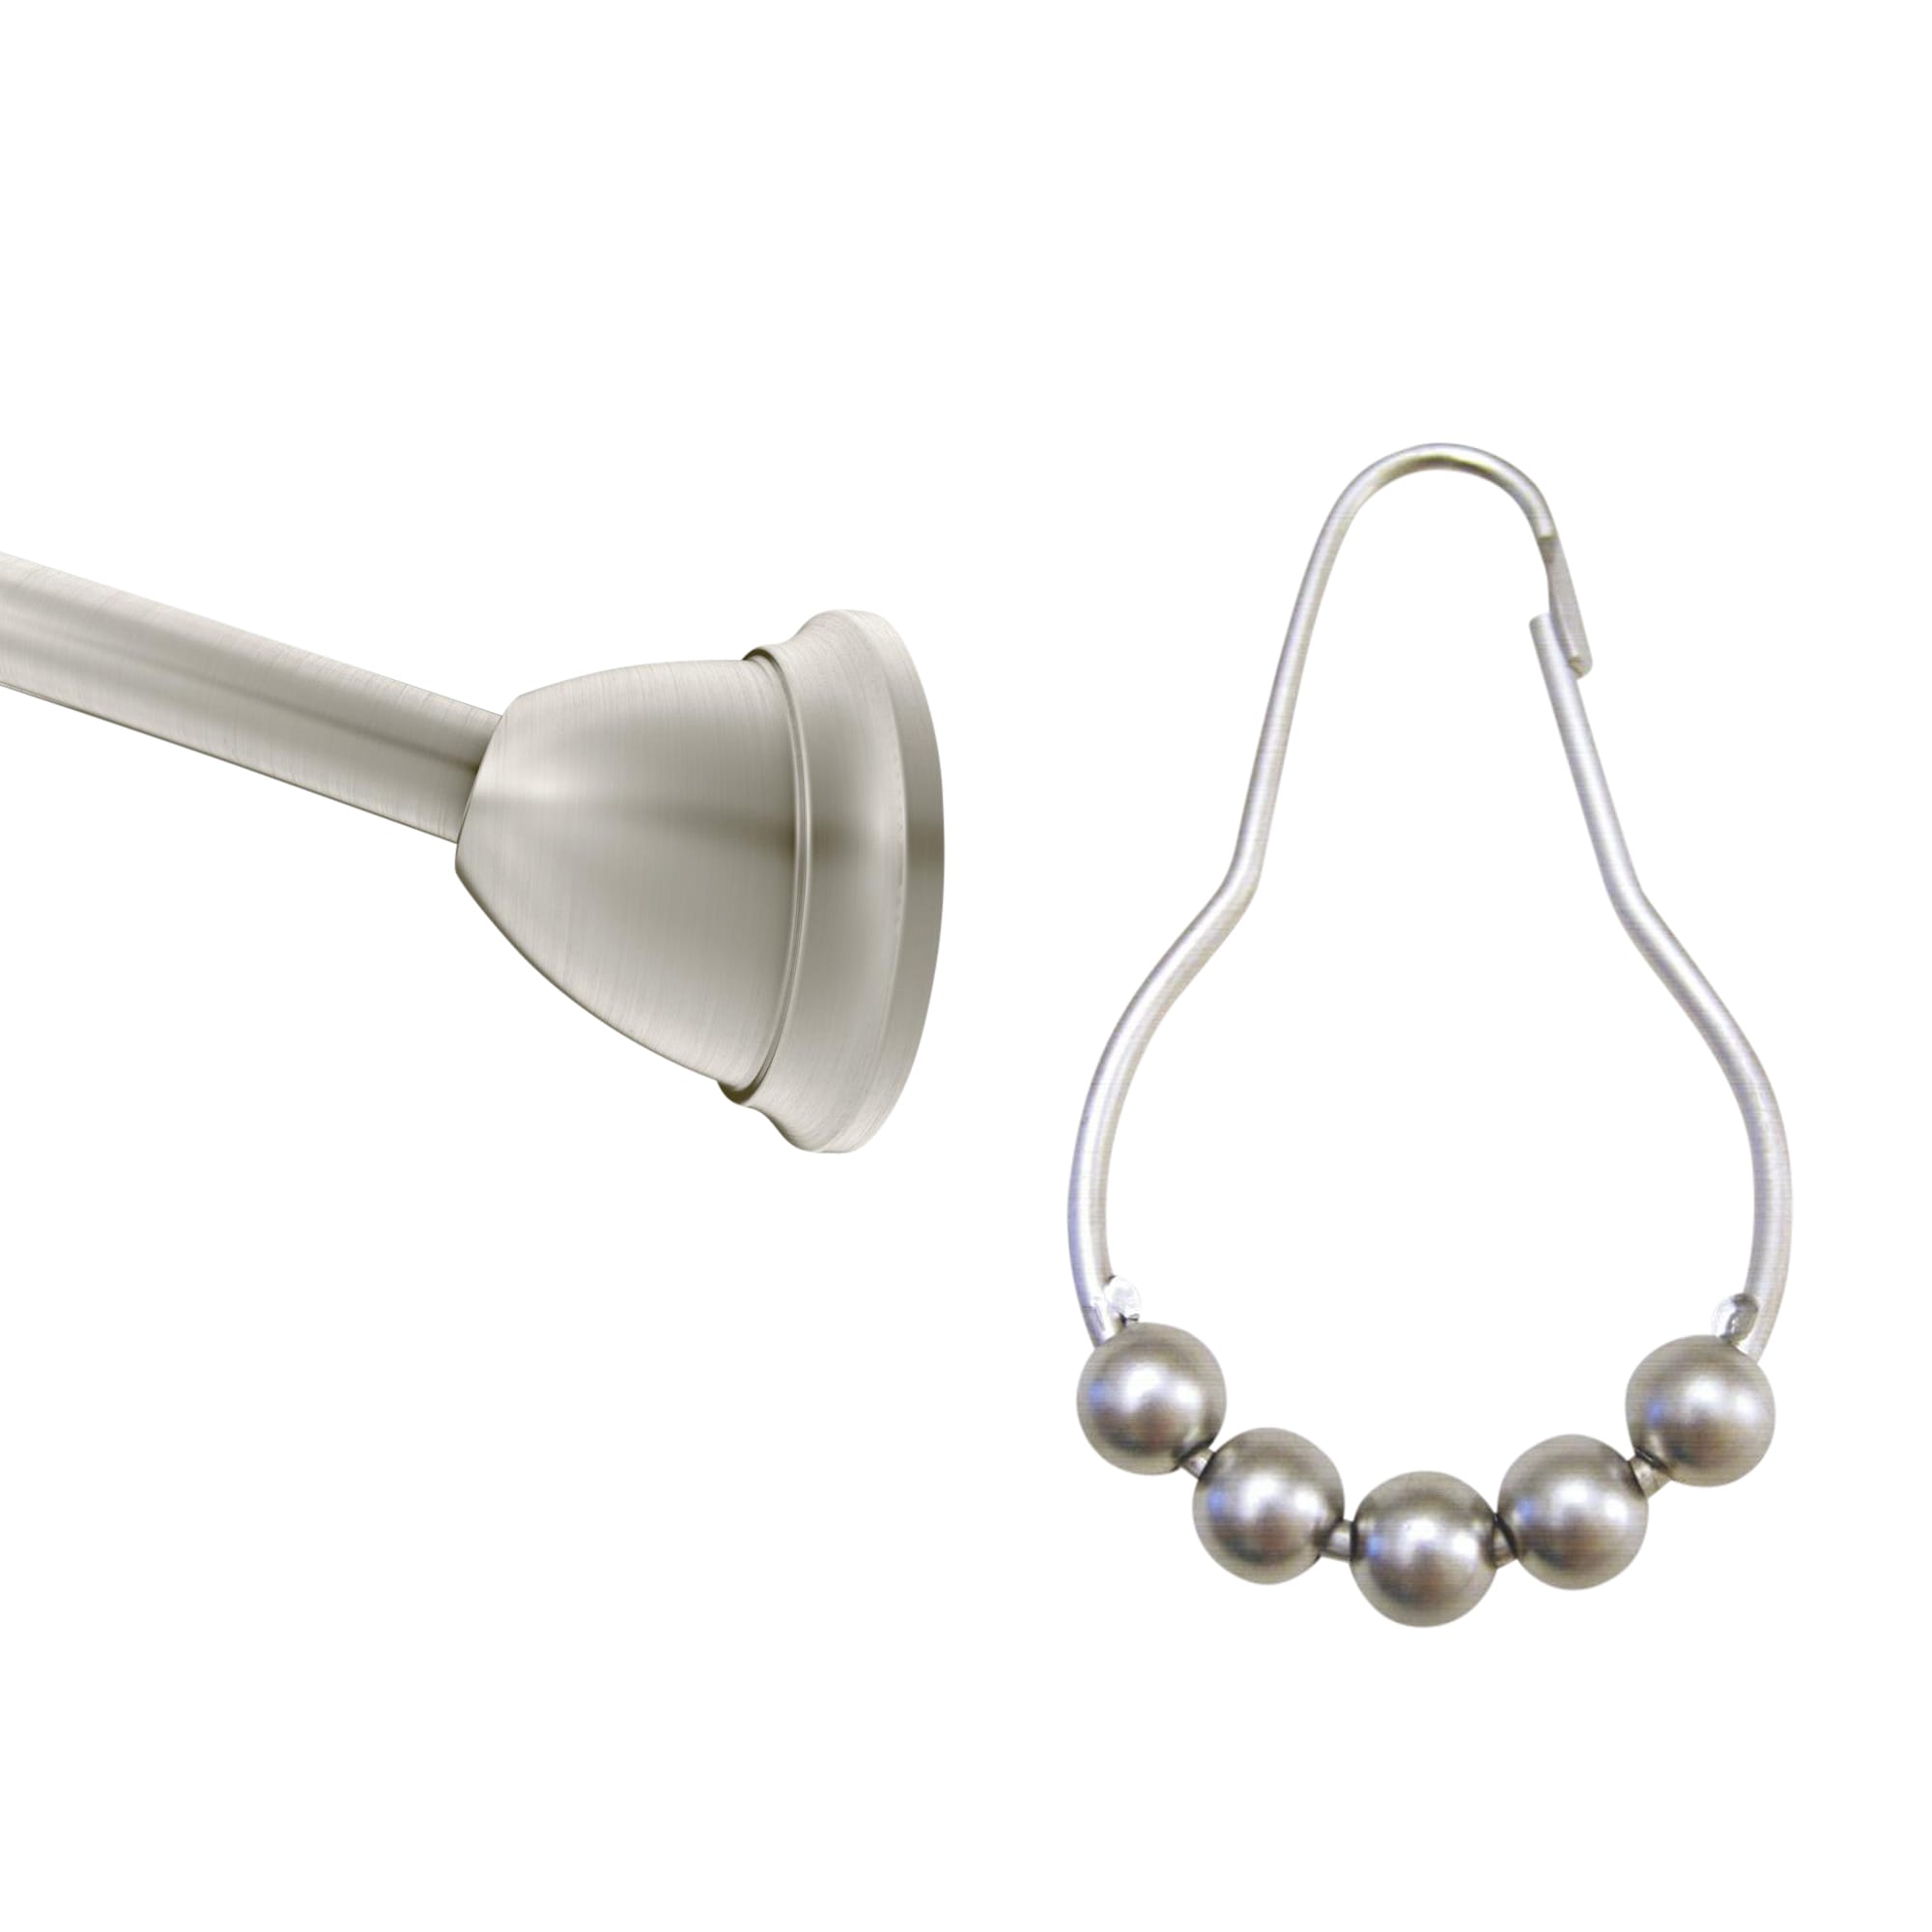 Moen 57-in to 60-in Tension Mount Brushed Nickel Tension Single Curve Shower Rod and Ring Set